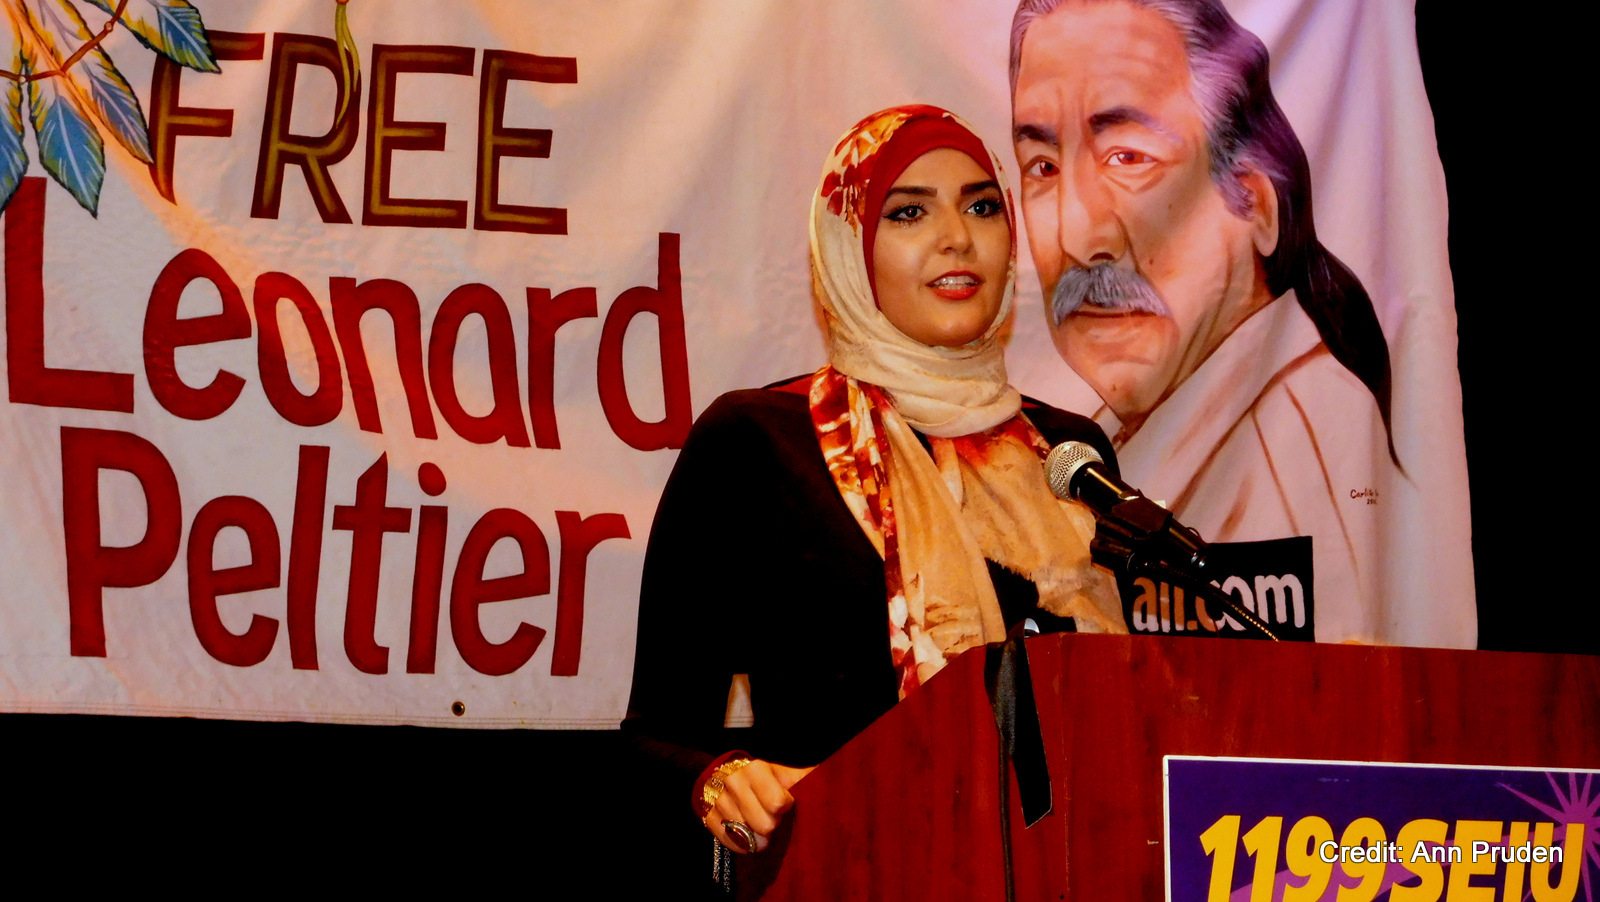 New York City Students for Justice in Palestine chair Nerdeen Kiswani speaks at a New York rally for Leonard Peltier on February 6, 2016.